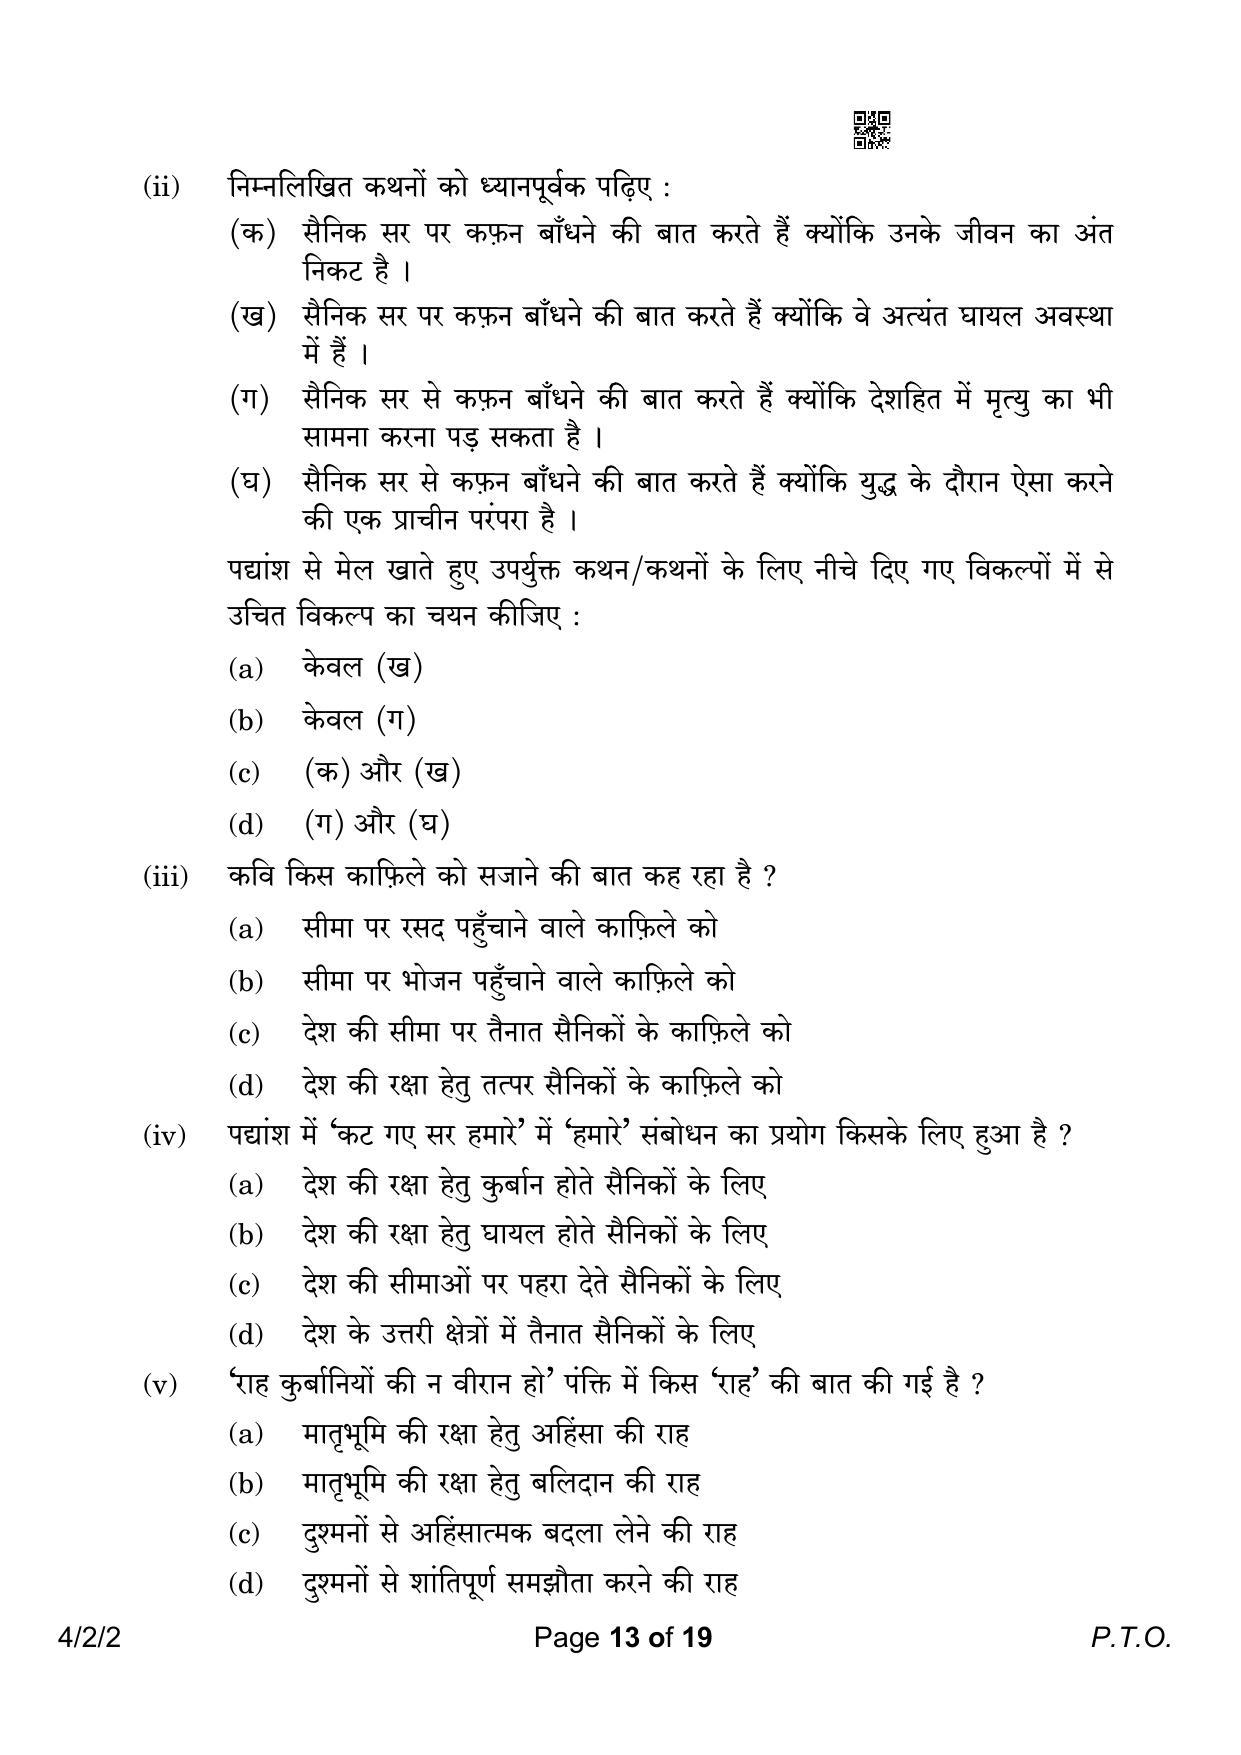 CBSE Class 10 4-2-2 Hindi B 2023 Question Paper - Page 13